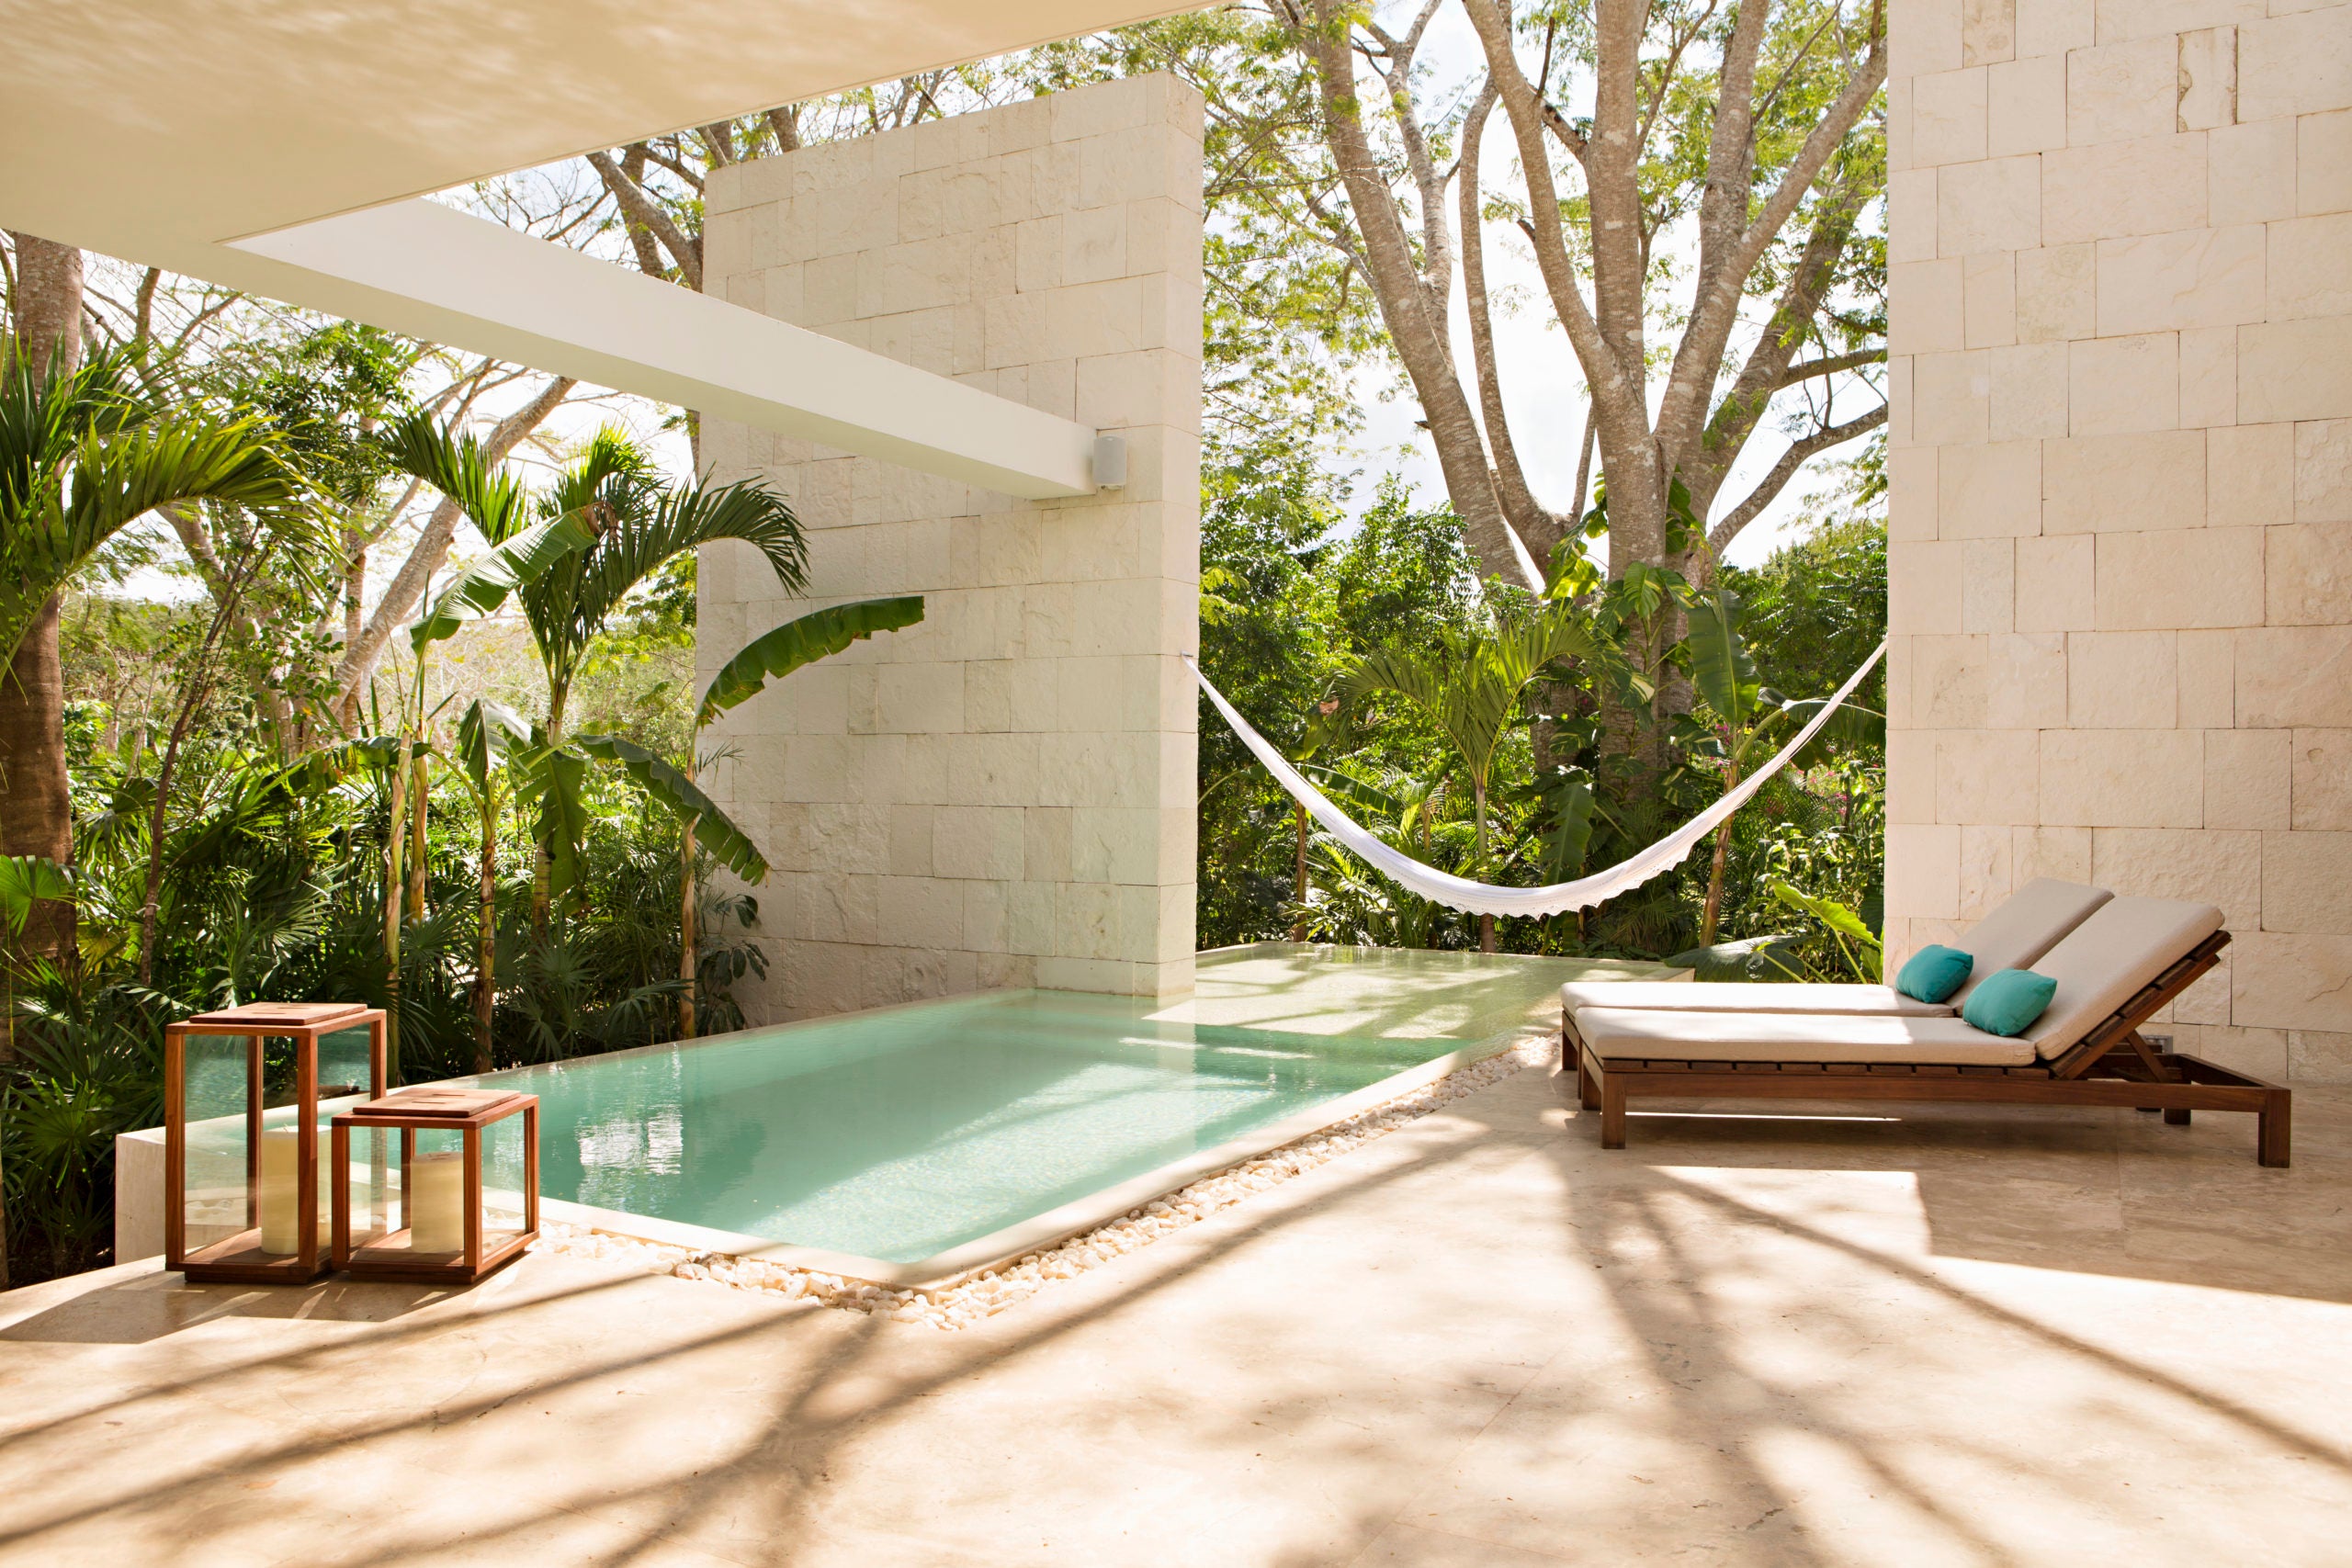 Chable - Luxury Wellness Retreats for the New Year